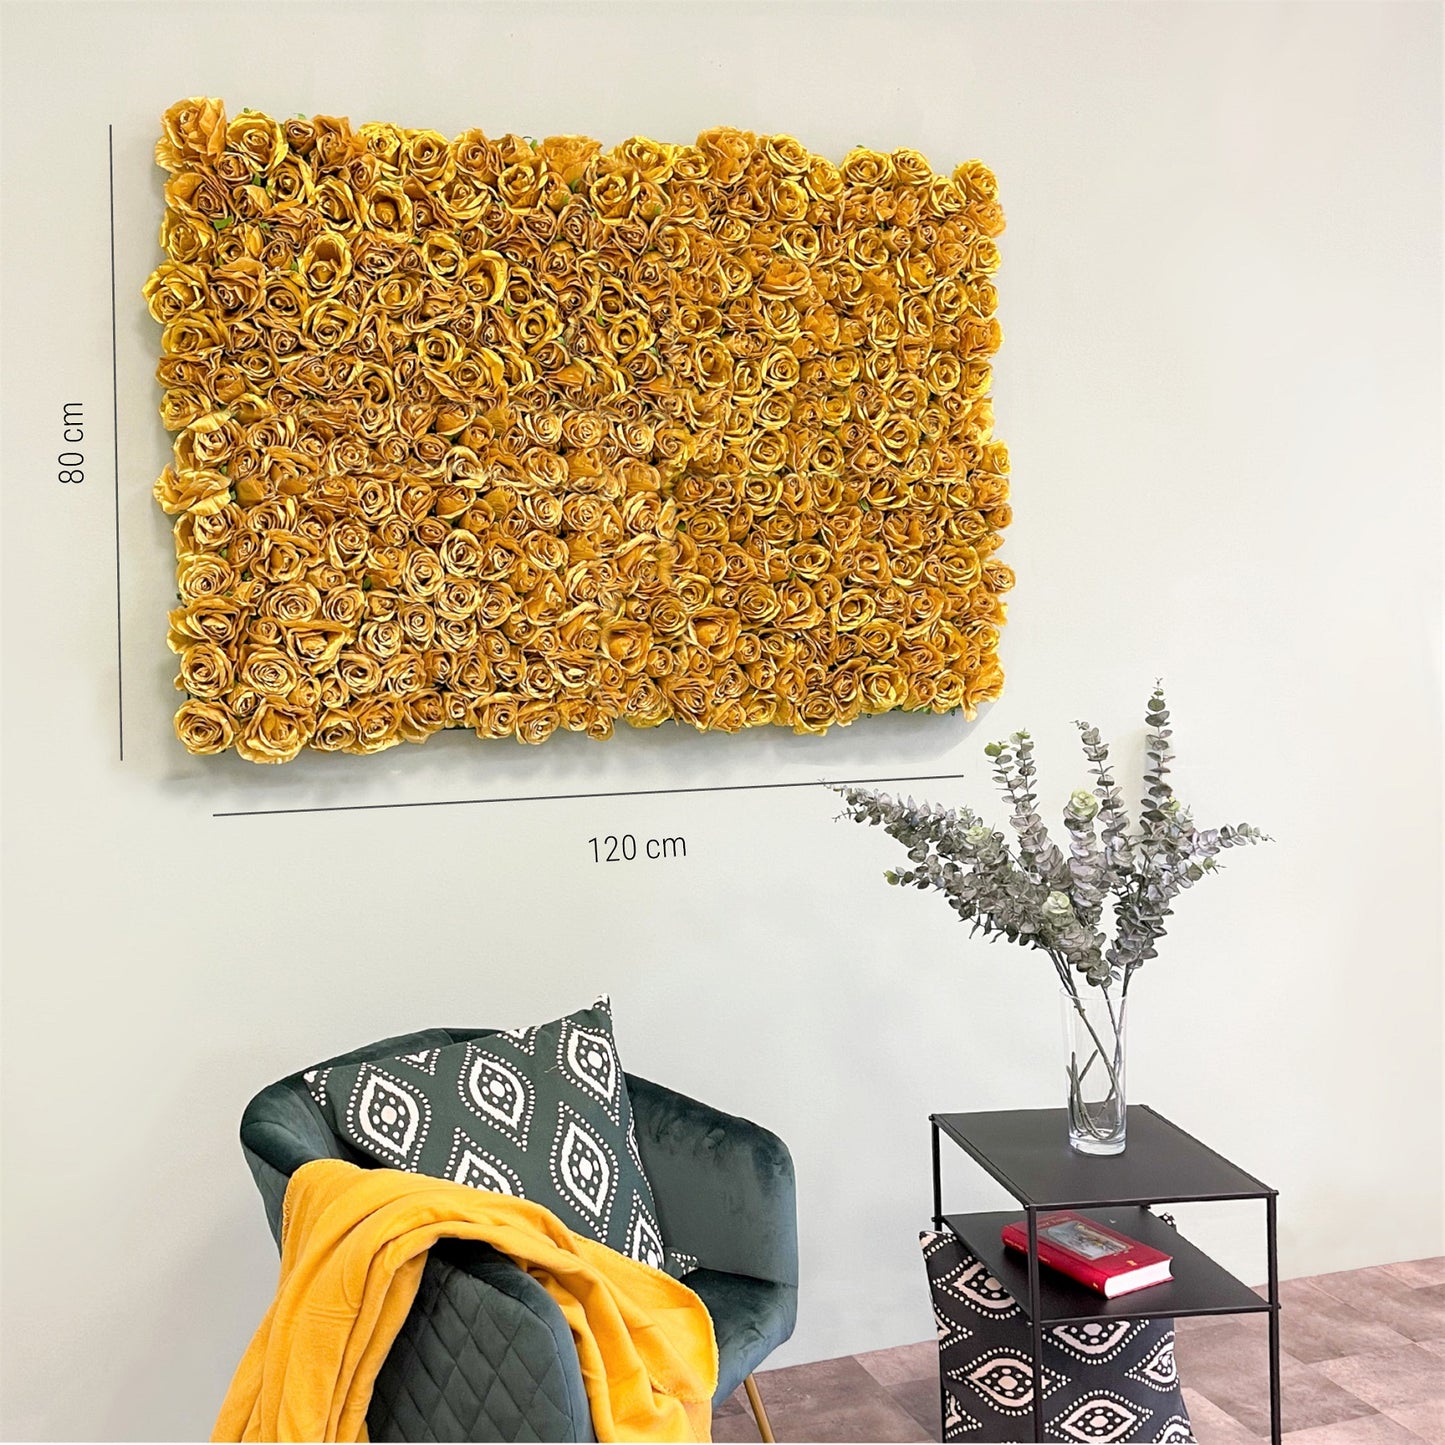 Flower wall "GOLDEN STAR" made of Realtouch artificial plants